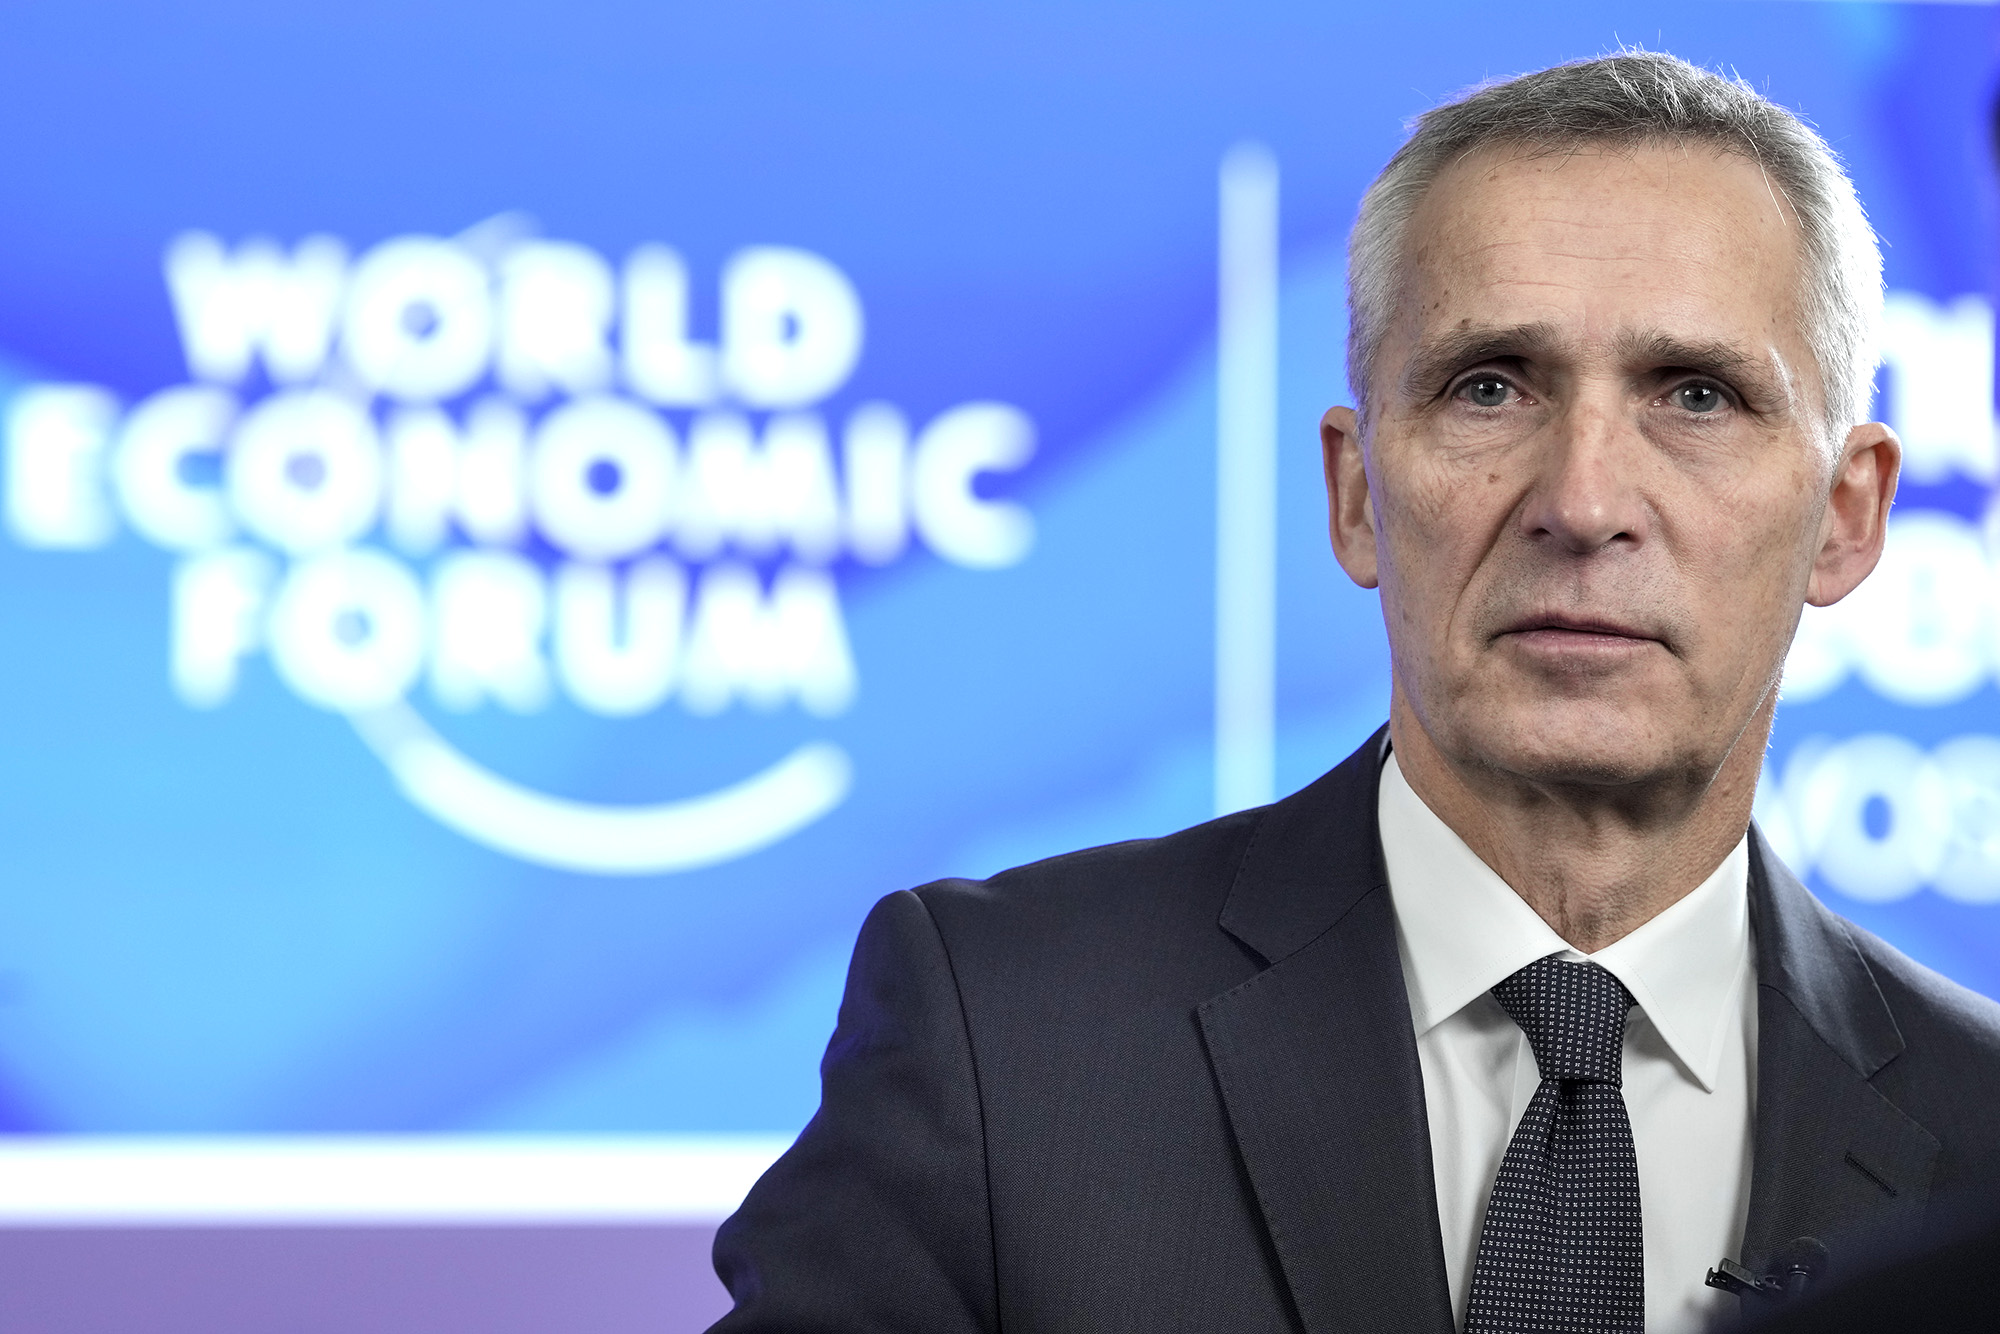 Secretary General of NATO Jens Stoltenberg is pictured at the World Economic Forum in Davos, Switzerland, on January 18.